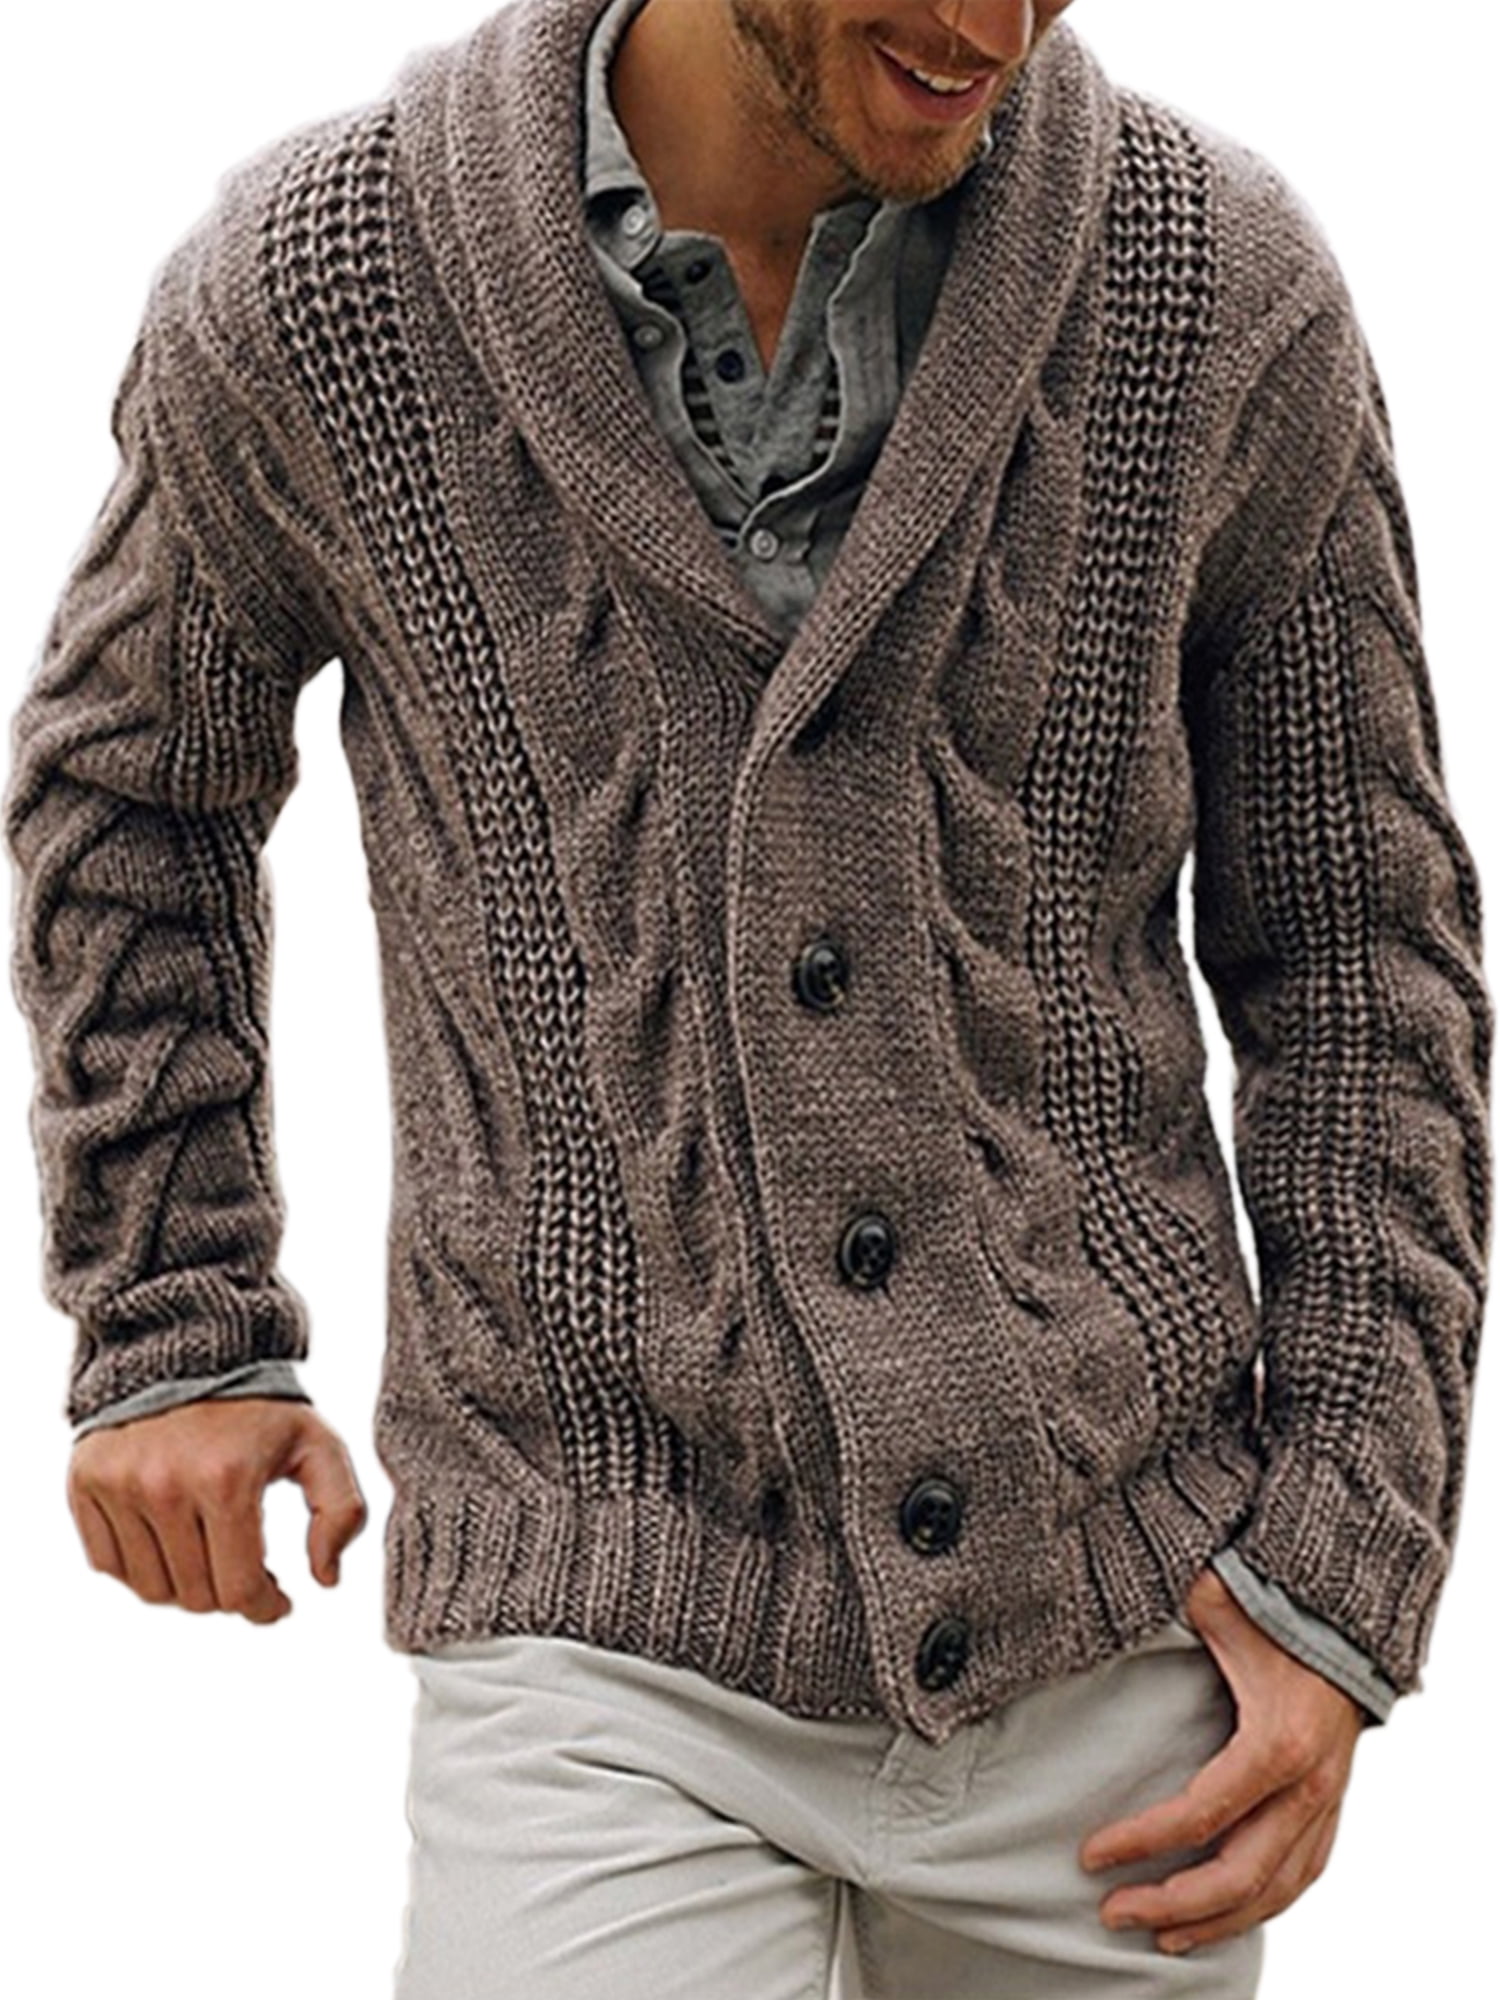 Fashion Winter Cotton Knitted Cardigan Mens Casual Thick Warm Sweater